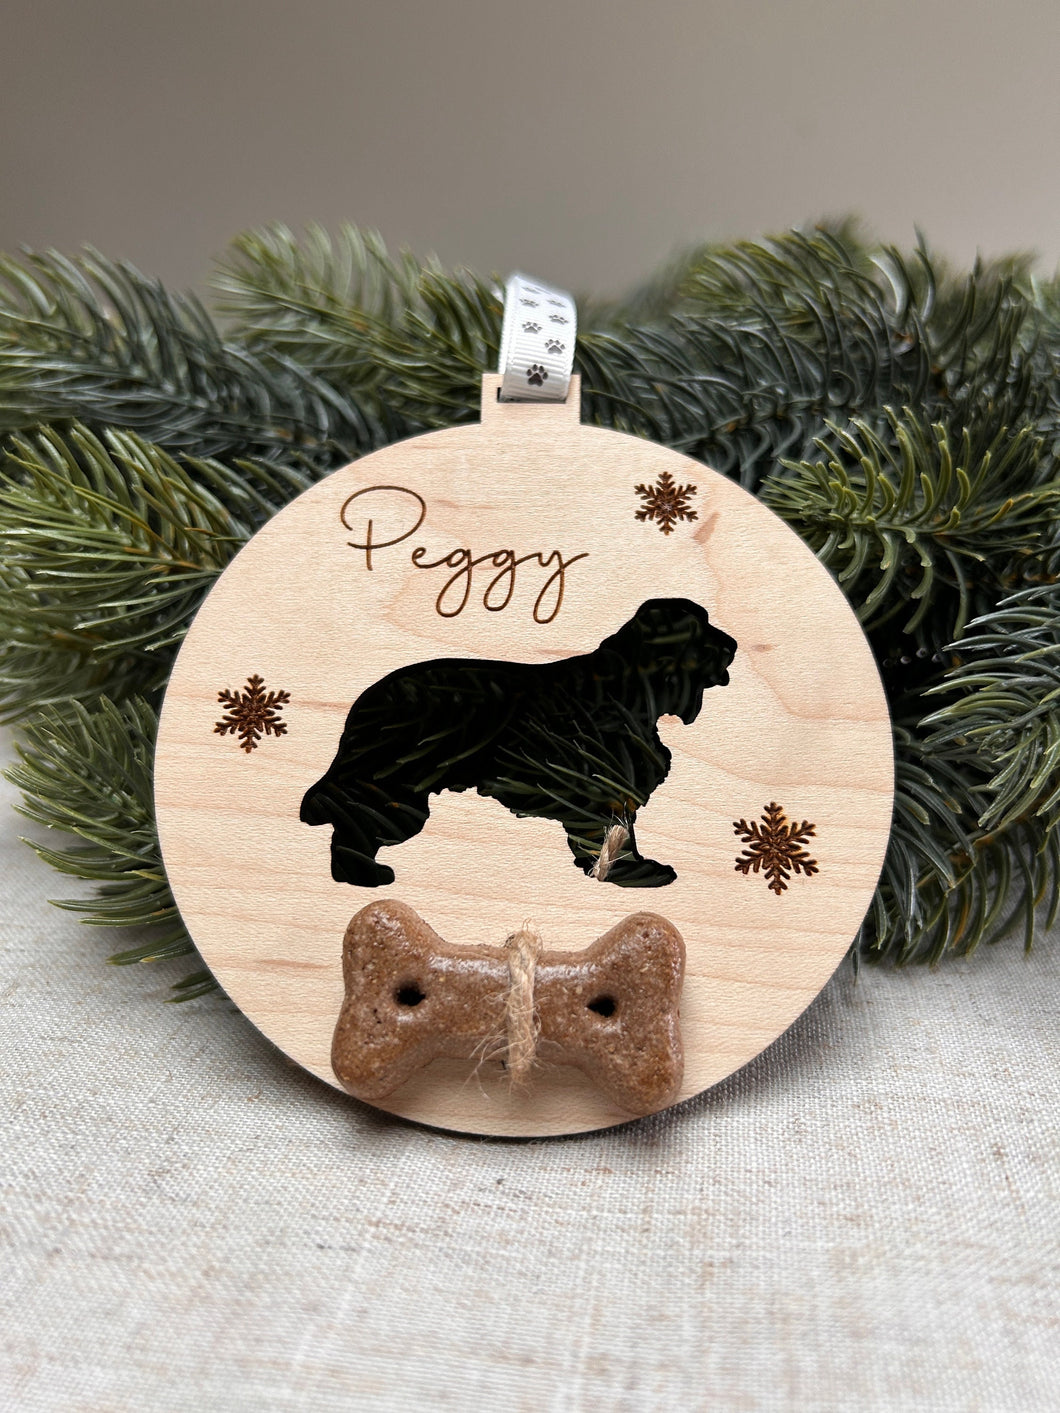 Doggy Christmas Gift, Dog Ornament Wood, Puppy Christmas Presents, Personalised Pet Bauble, Custom Christmas Dog Ornament, Dog Xmas Decor